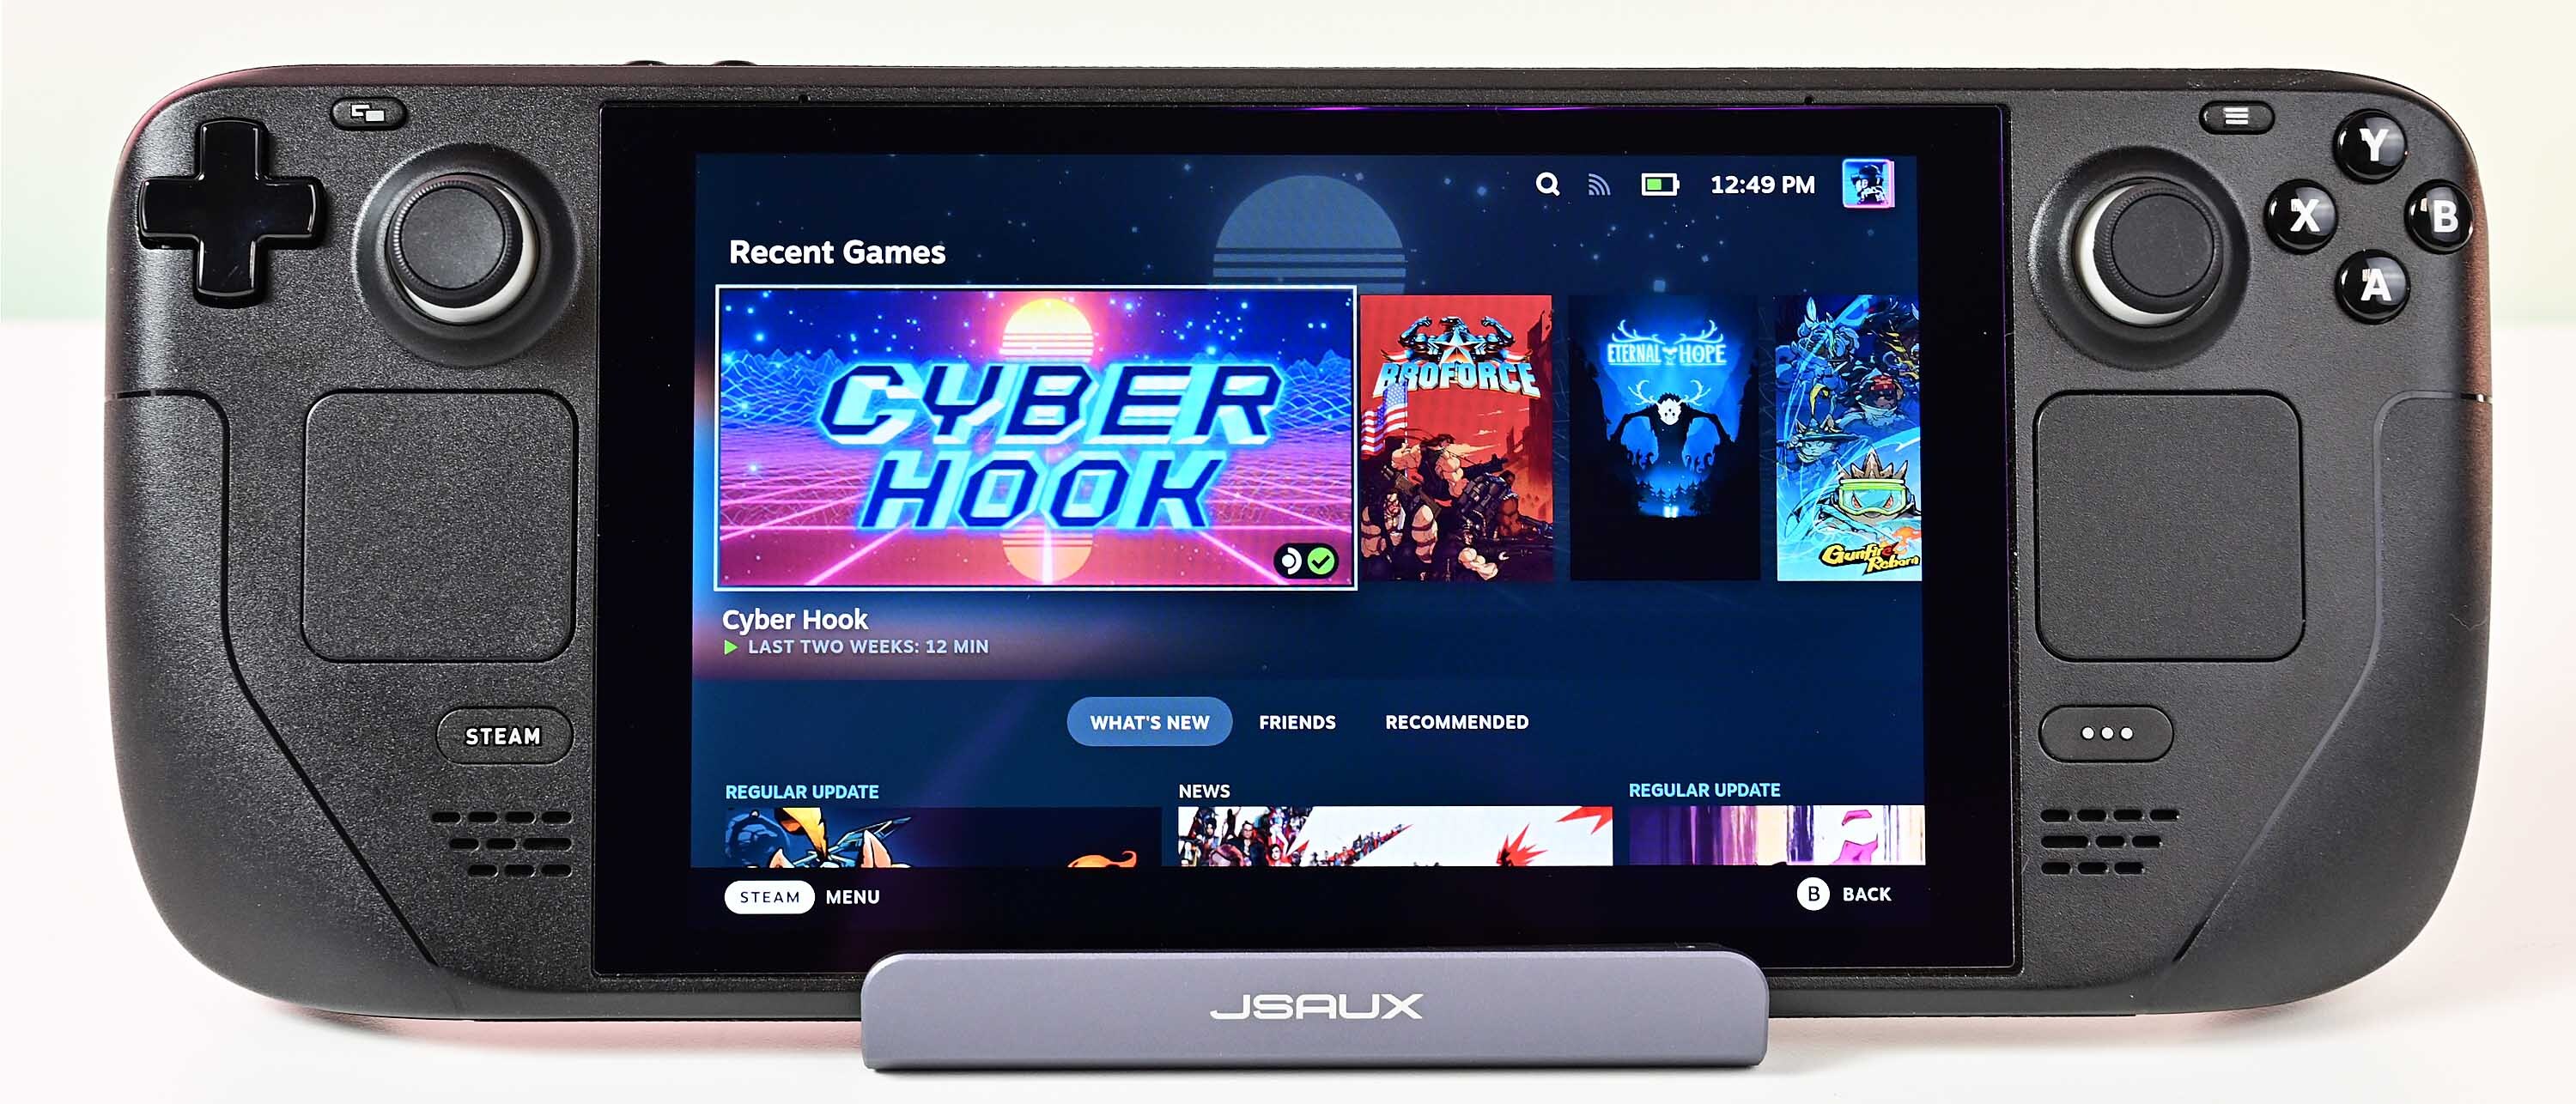 JSAUX Steam Deck dock review: Why pay more?